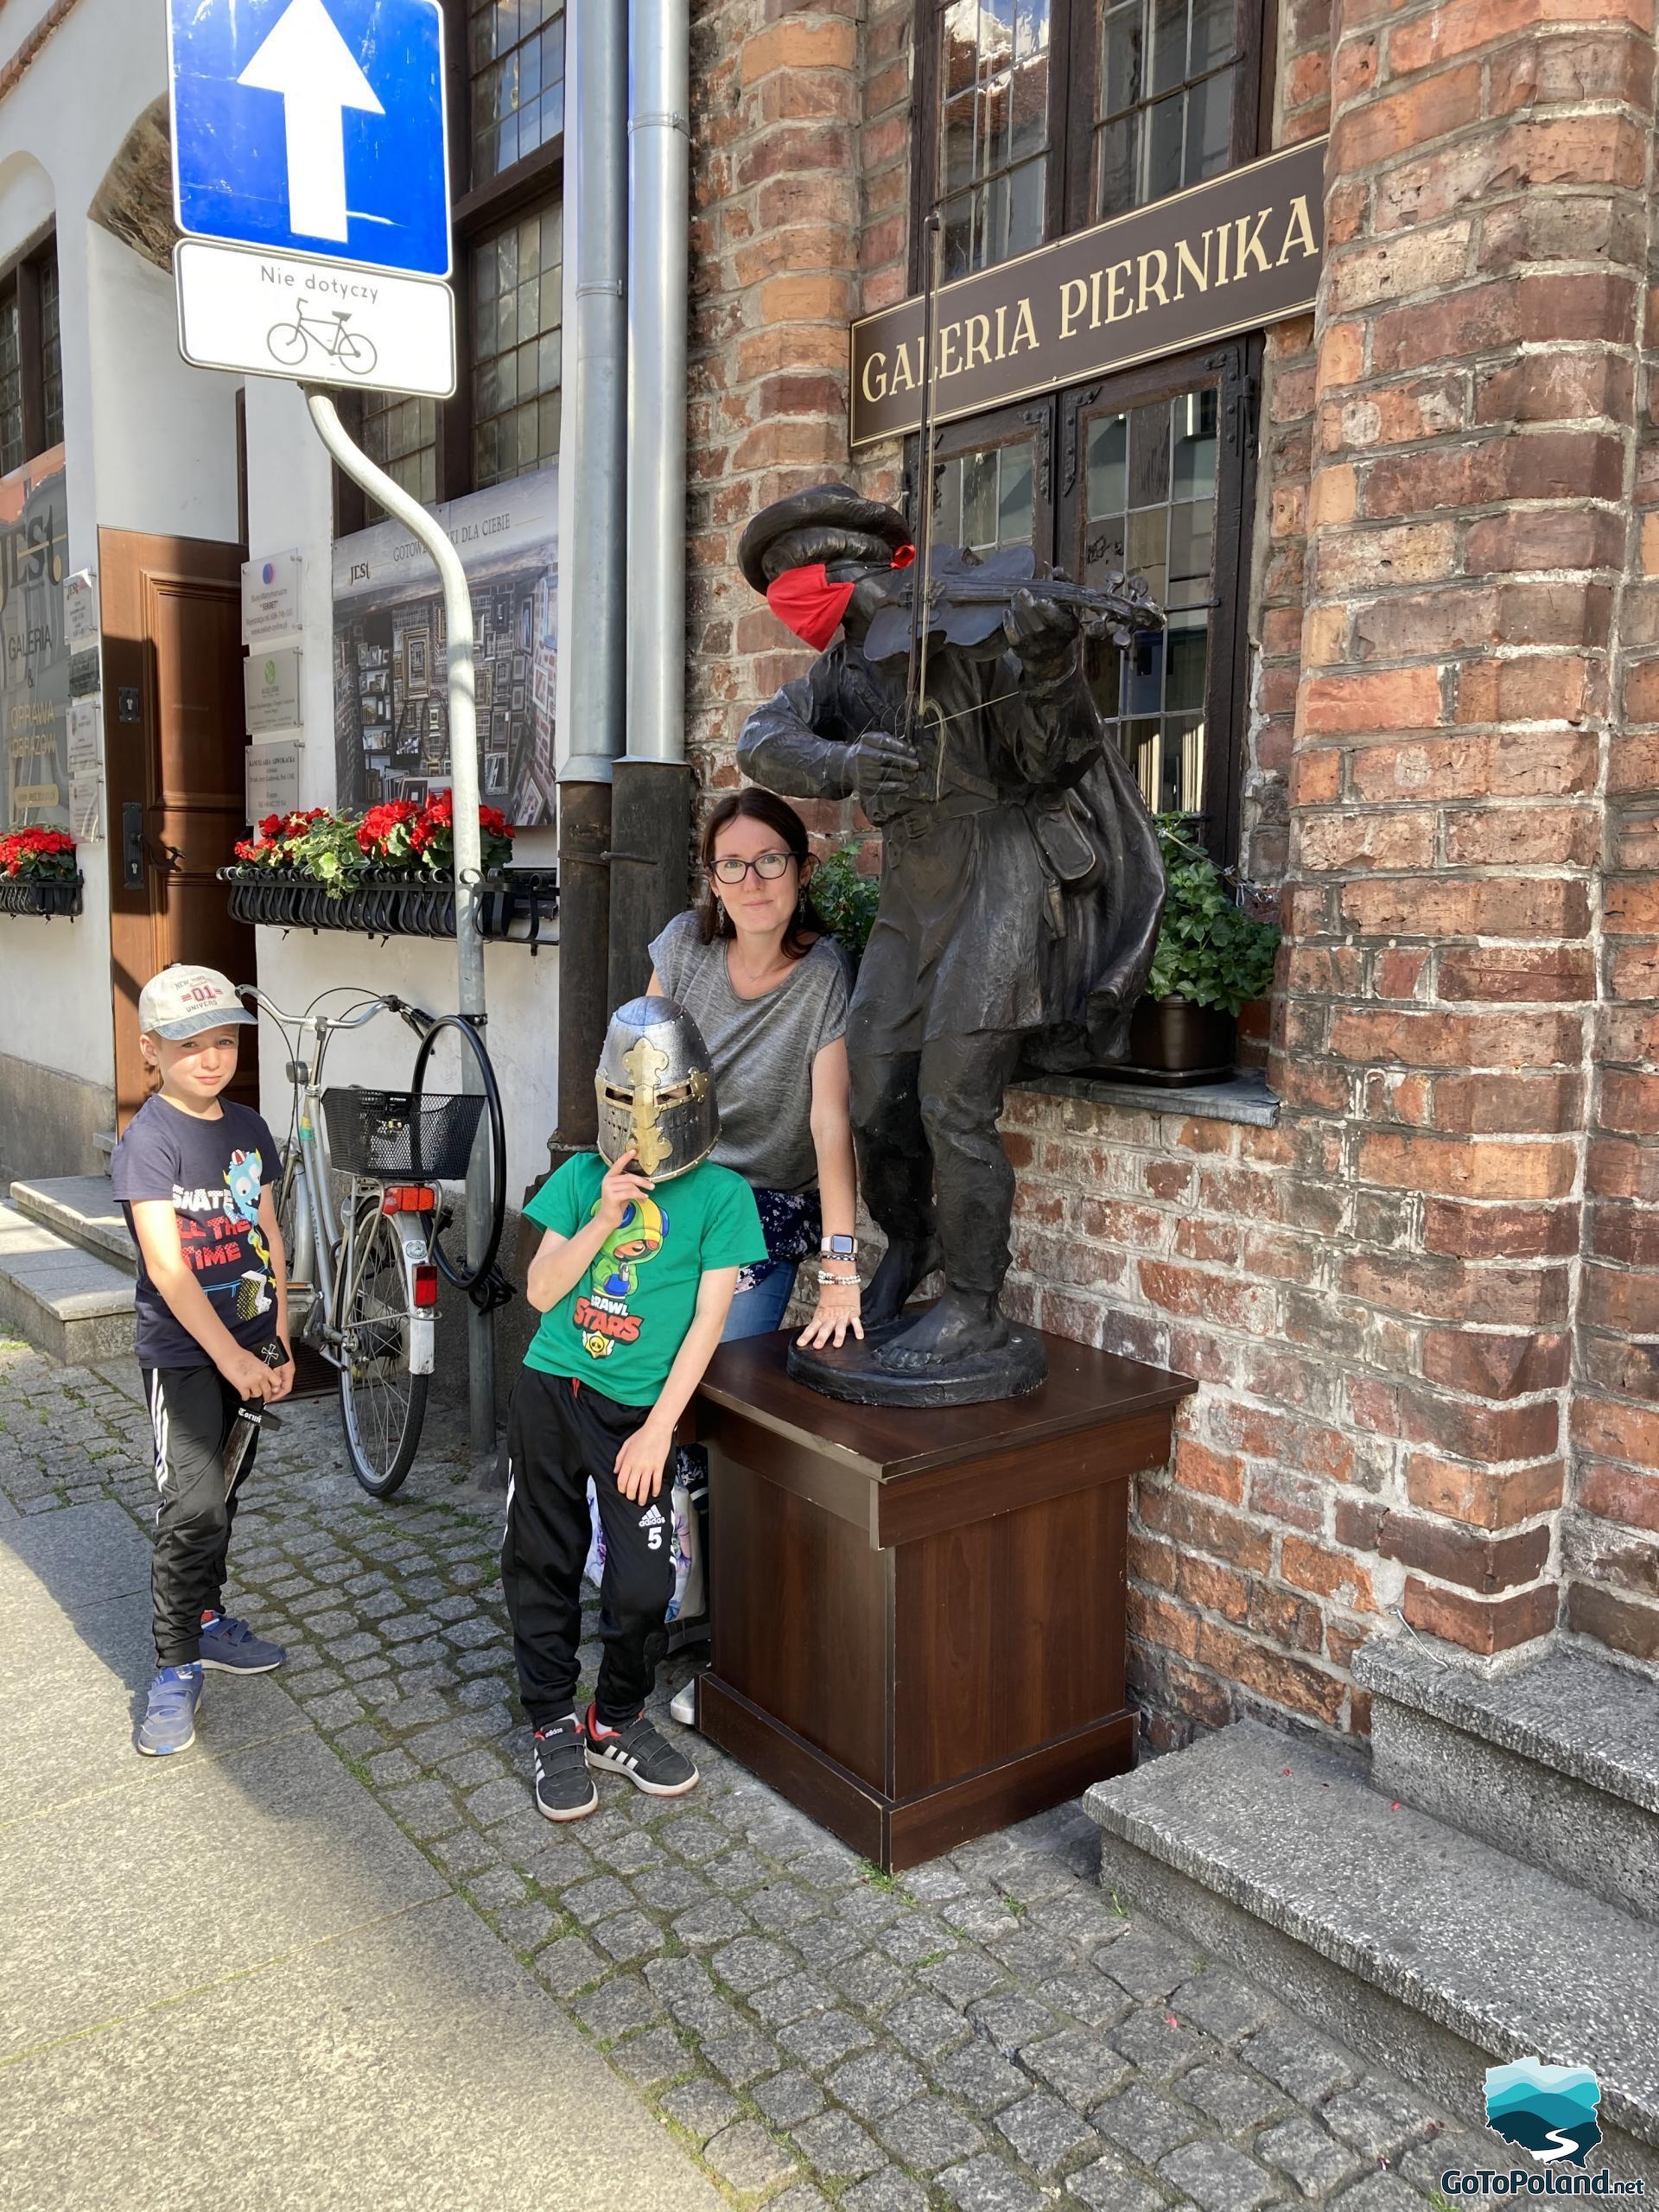 a woman and two children are standing near the statue of a violinist who has a red anti-covid mask and a violin in his hand, the figurine is in front of the Gingerbread Gallery